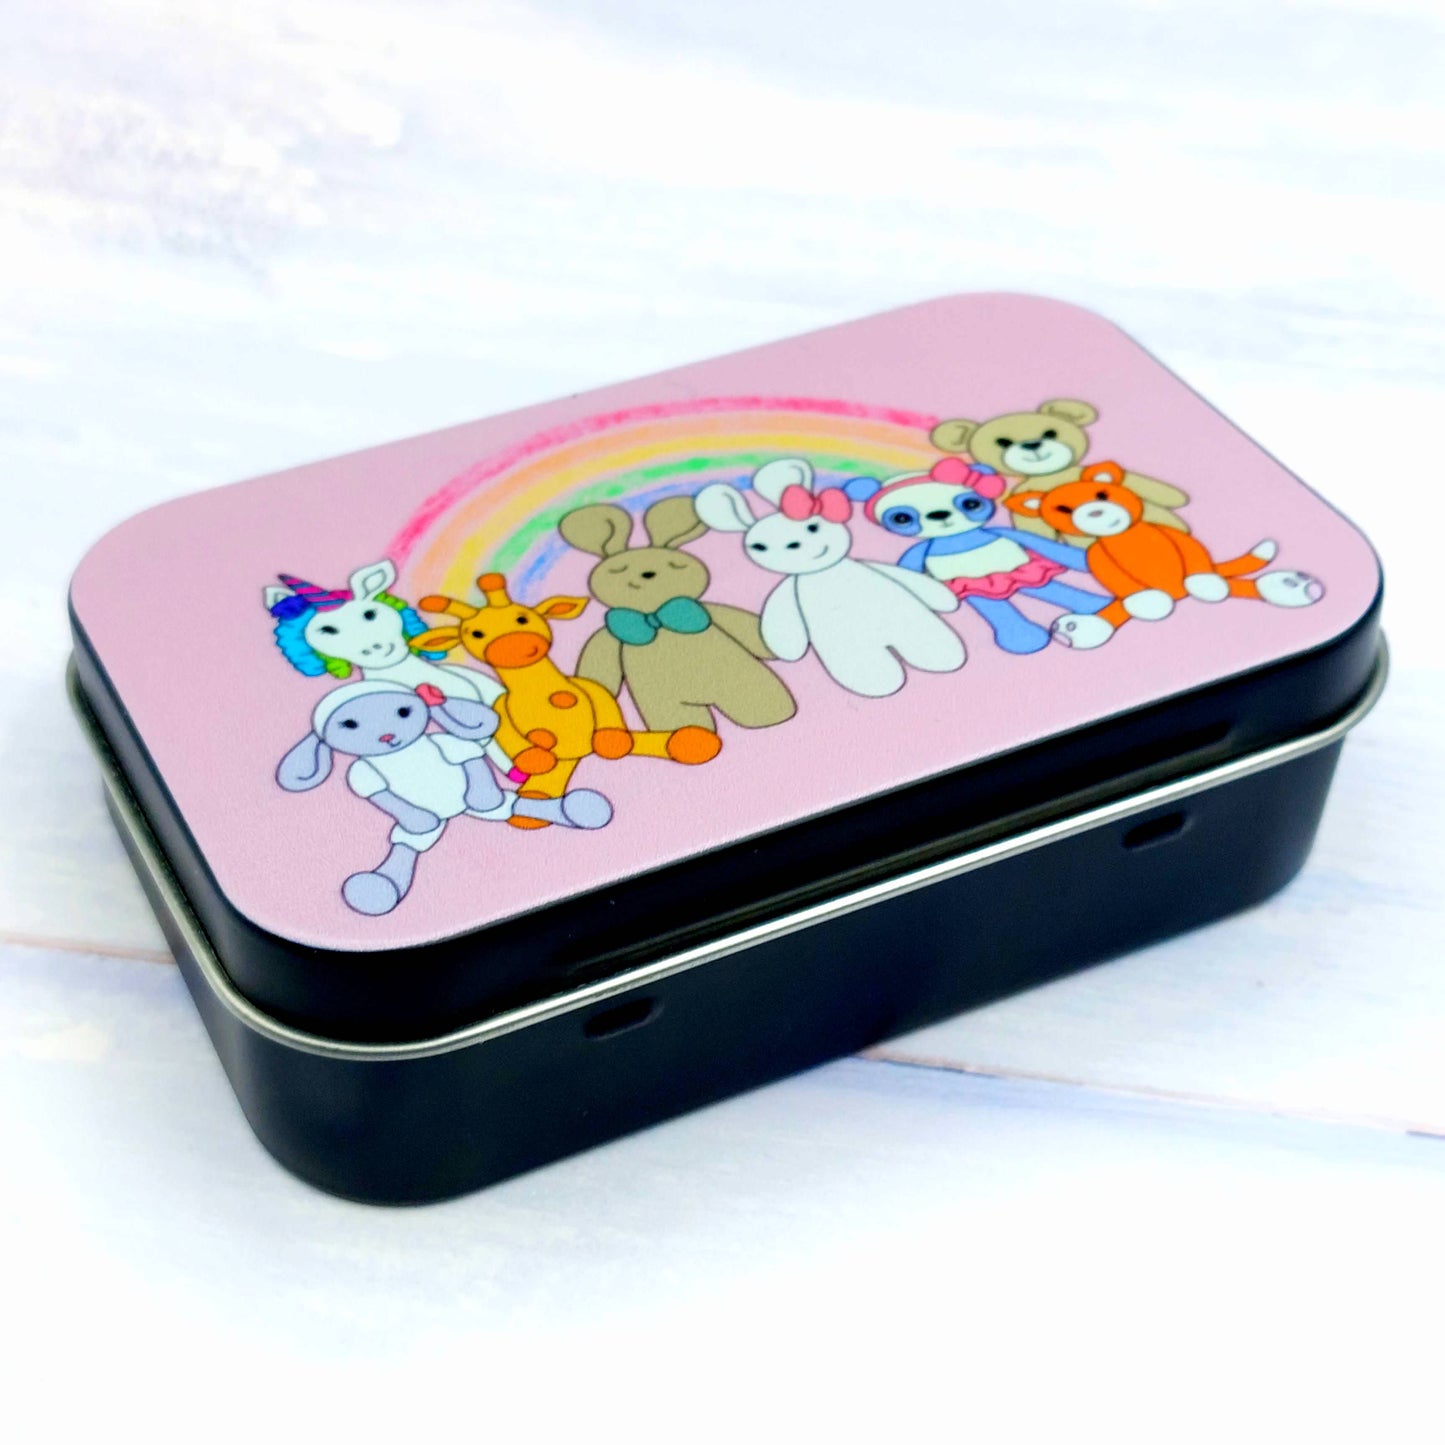 Wee Woolly Wonderfuls Hinged Tins - 2 sizes and designs available